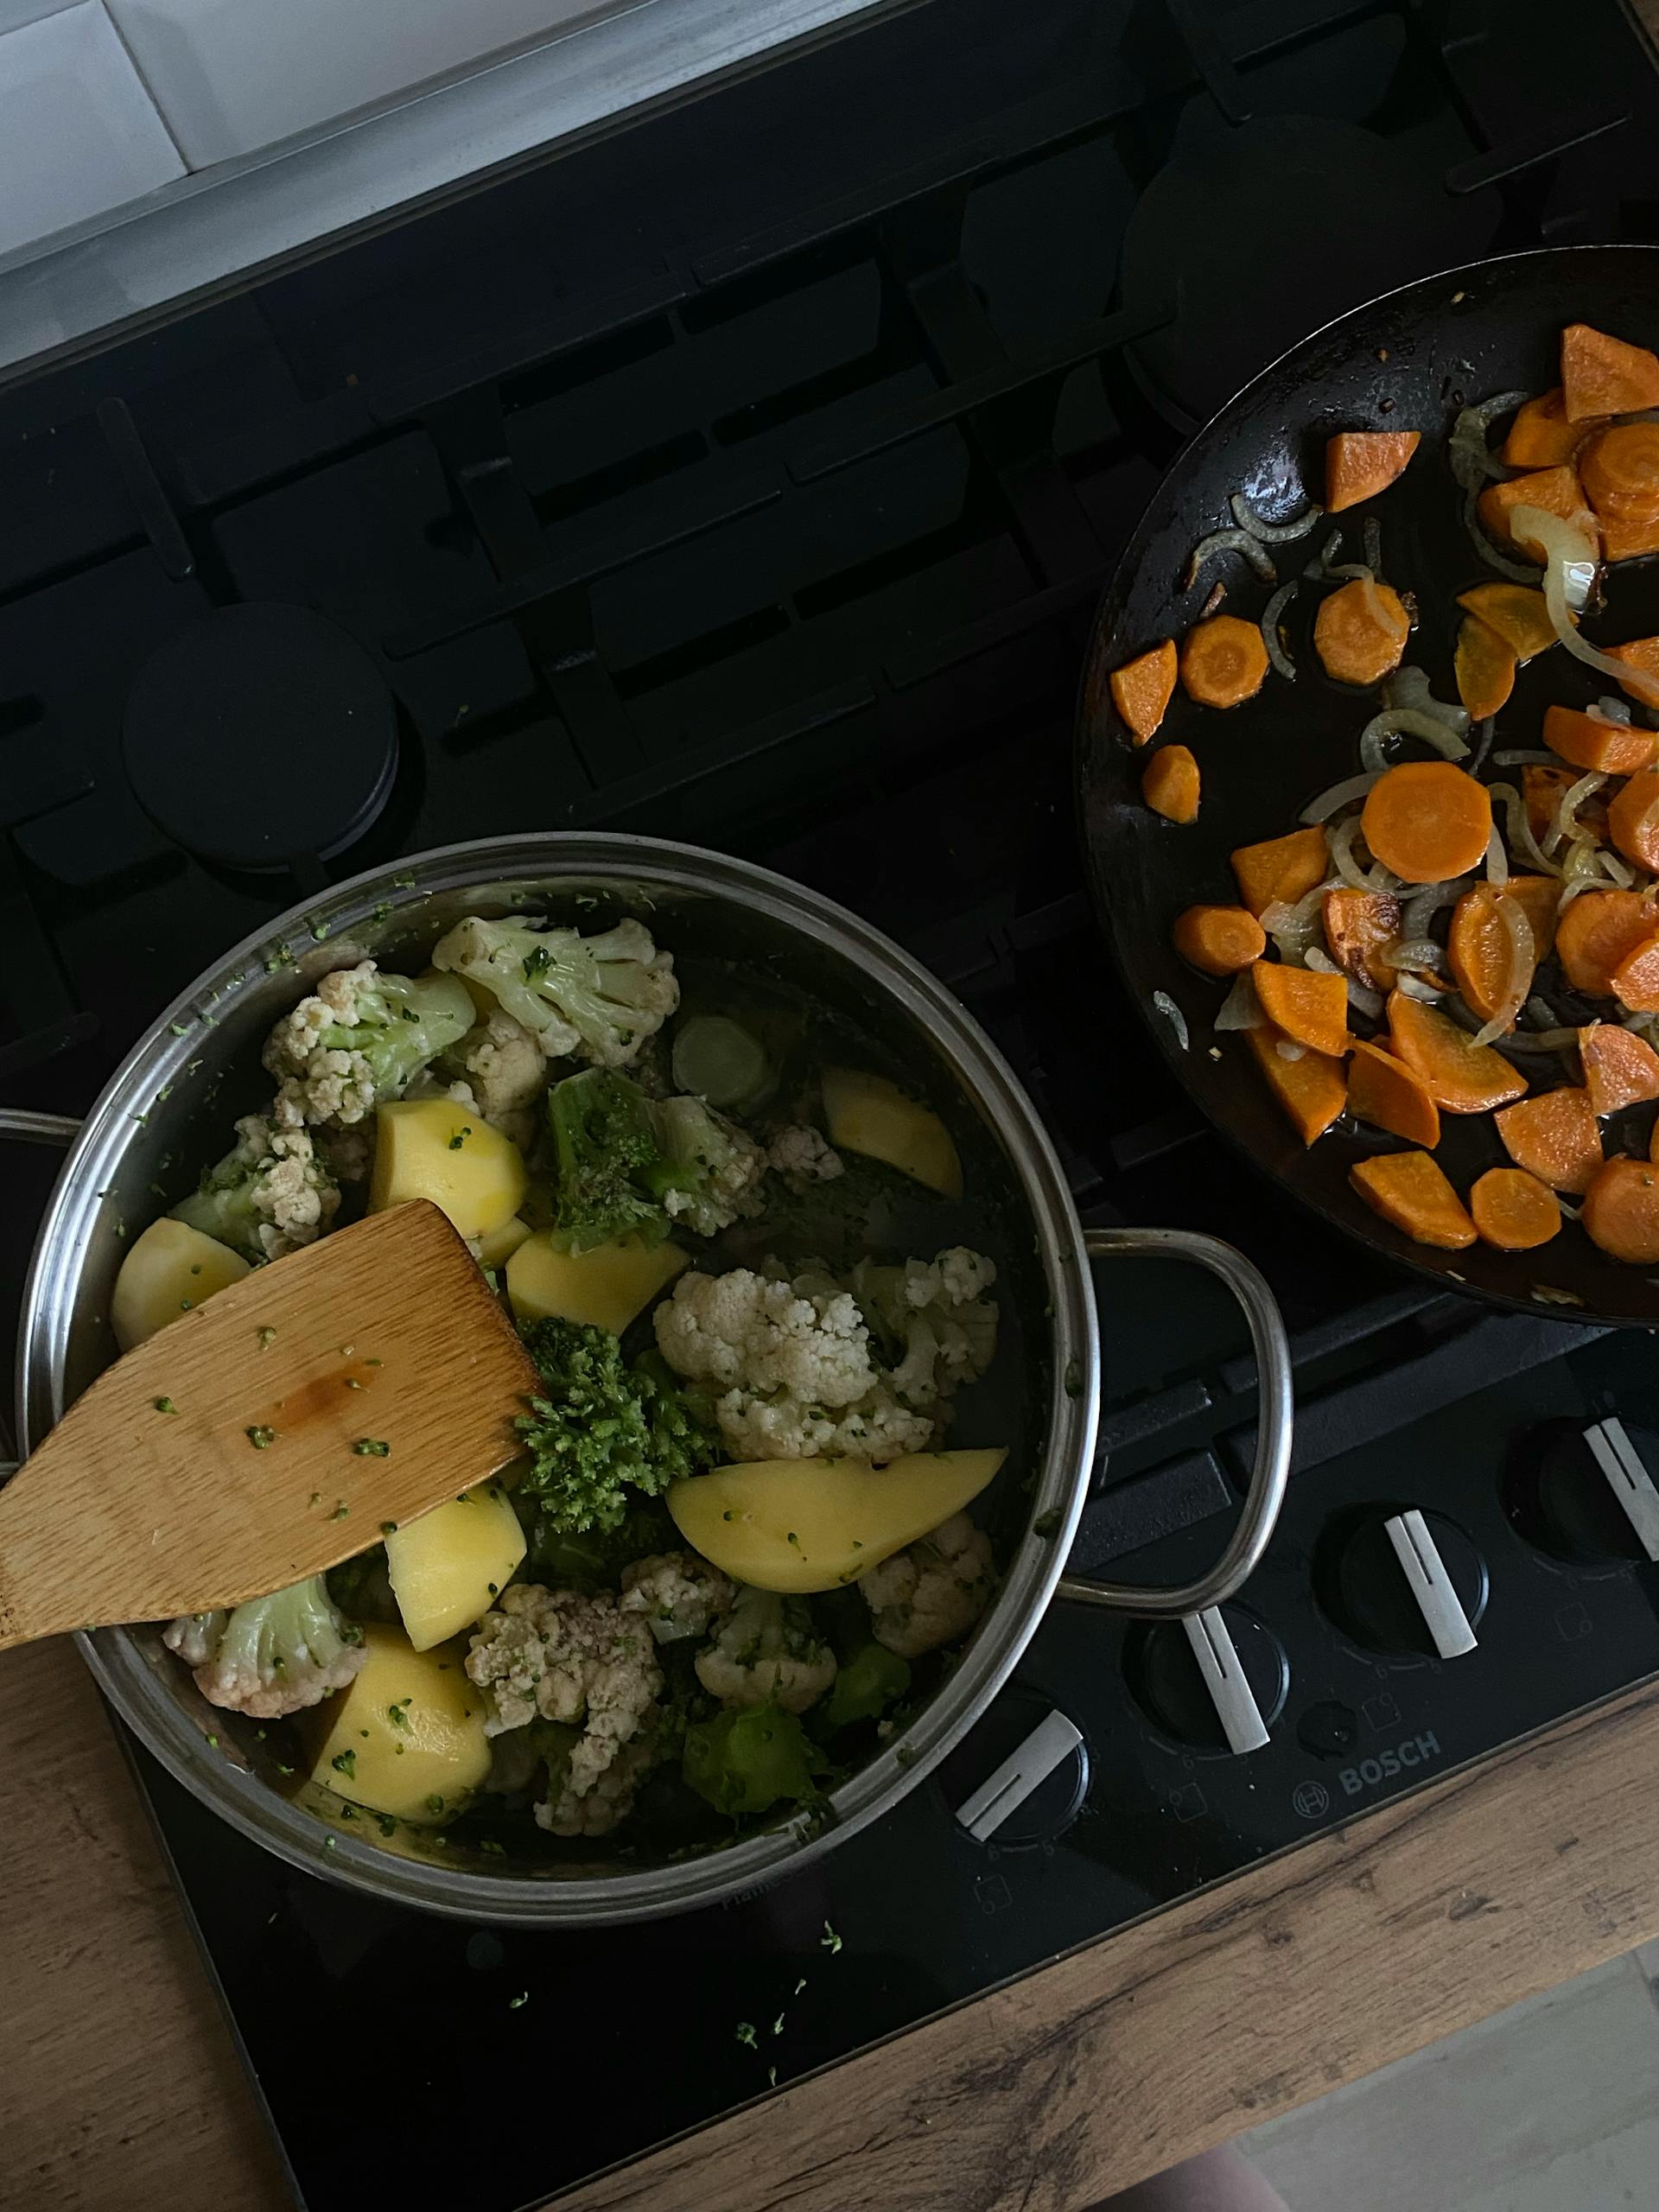 Pots of food on a stove | Source: Pexels